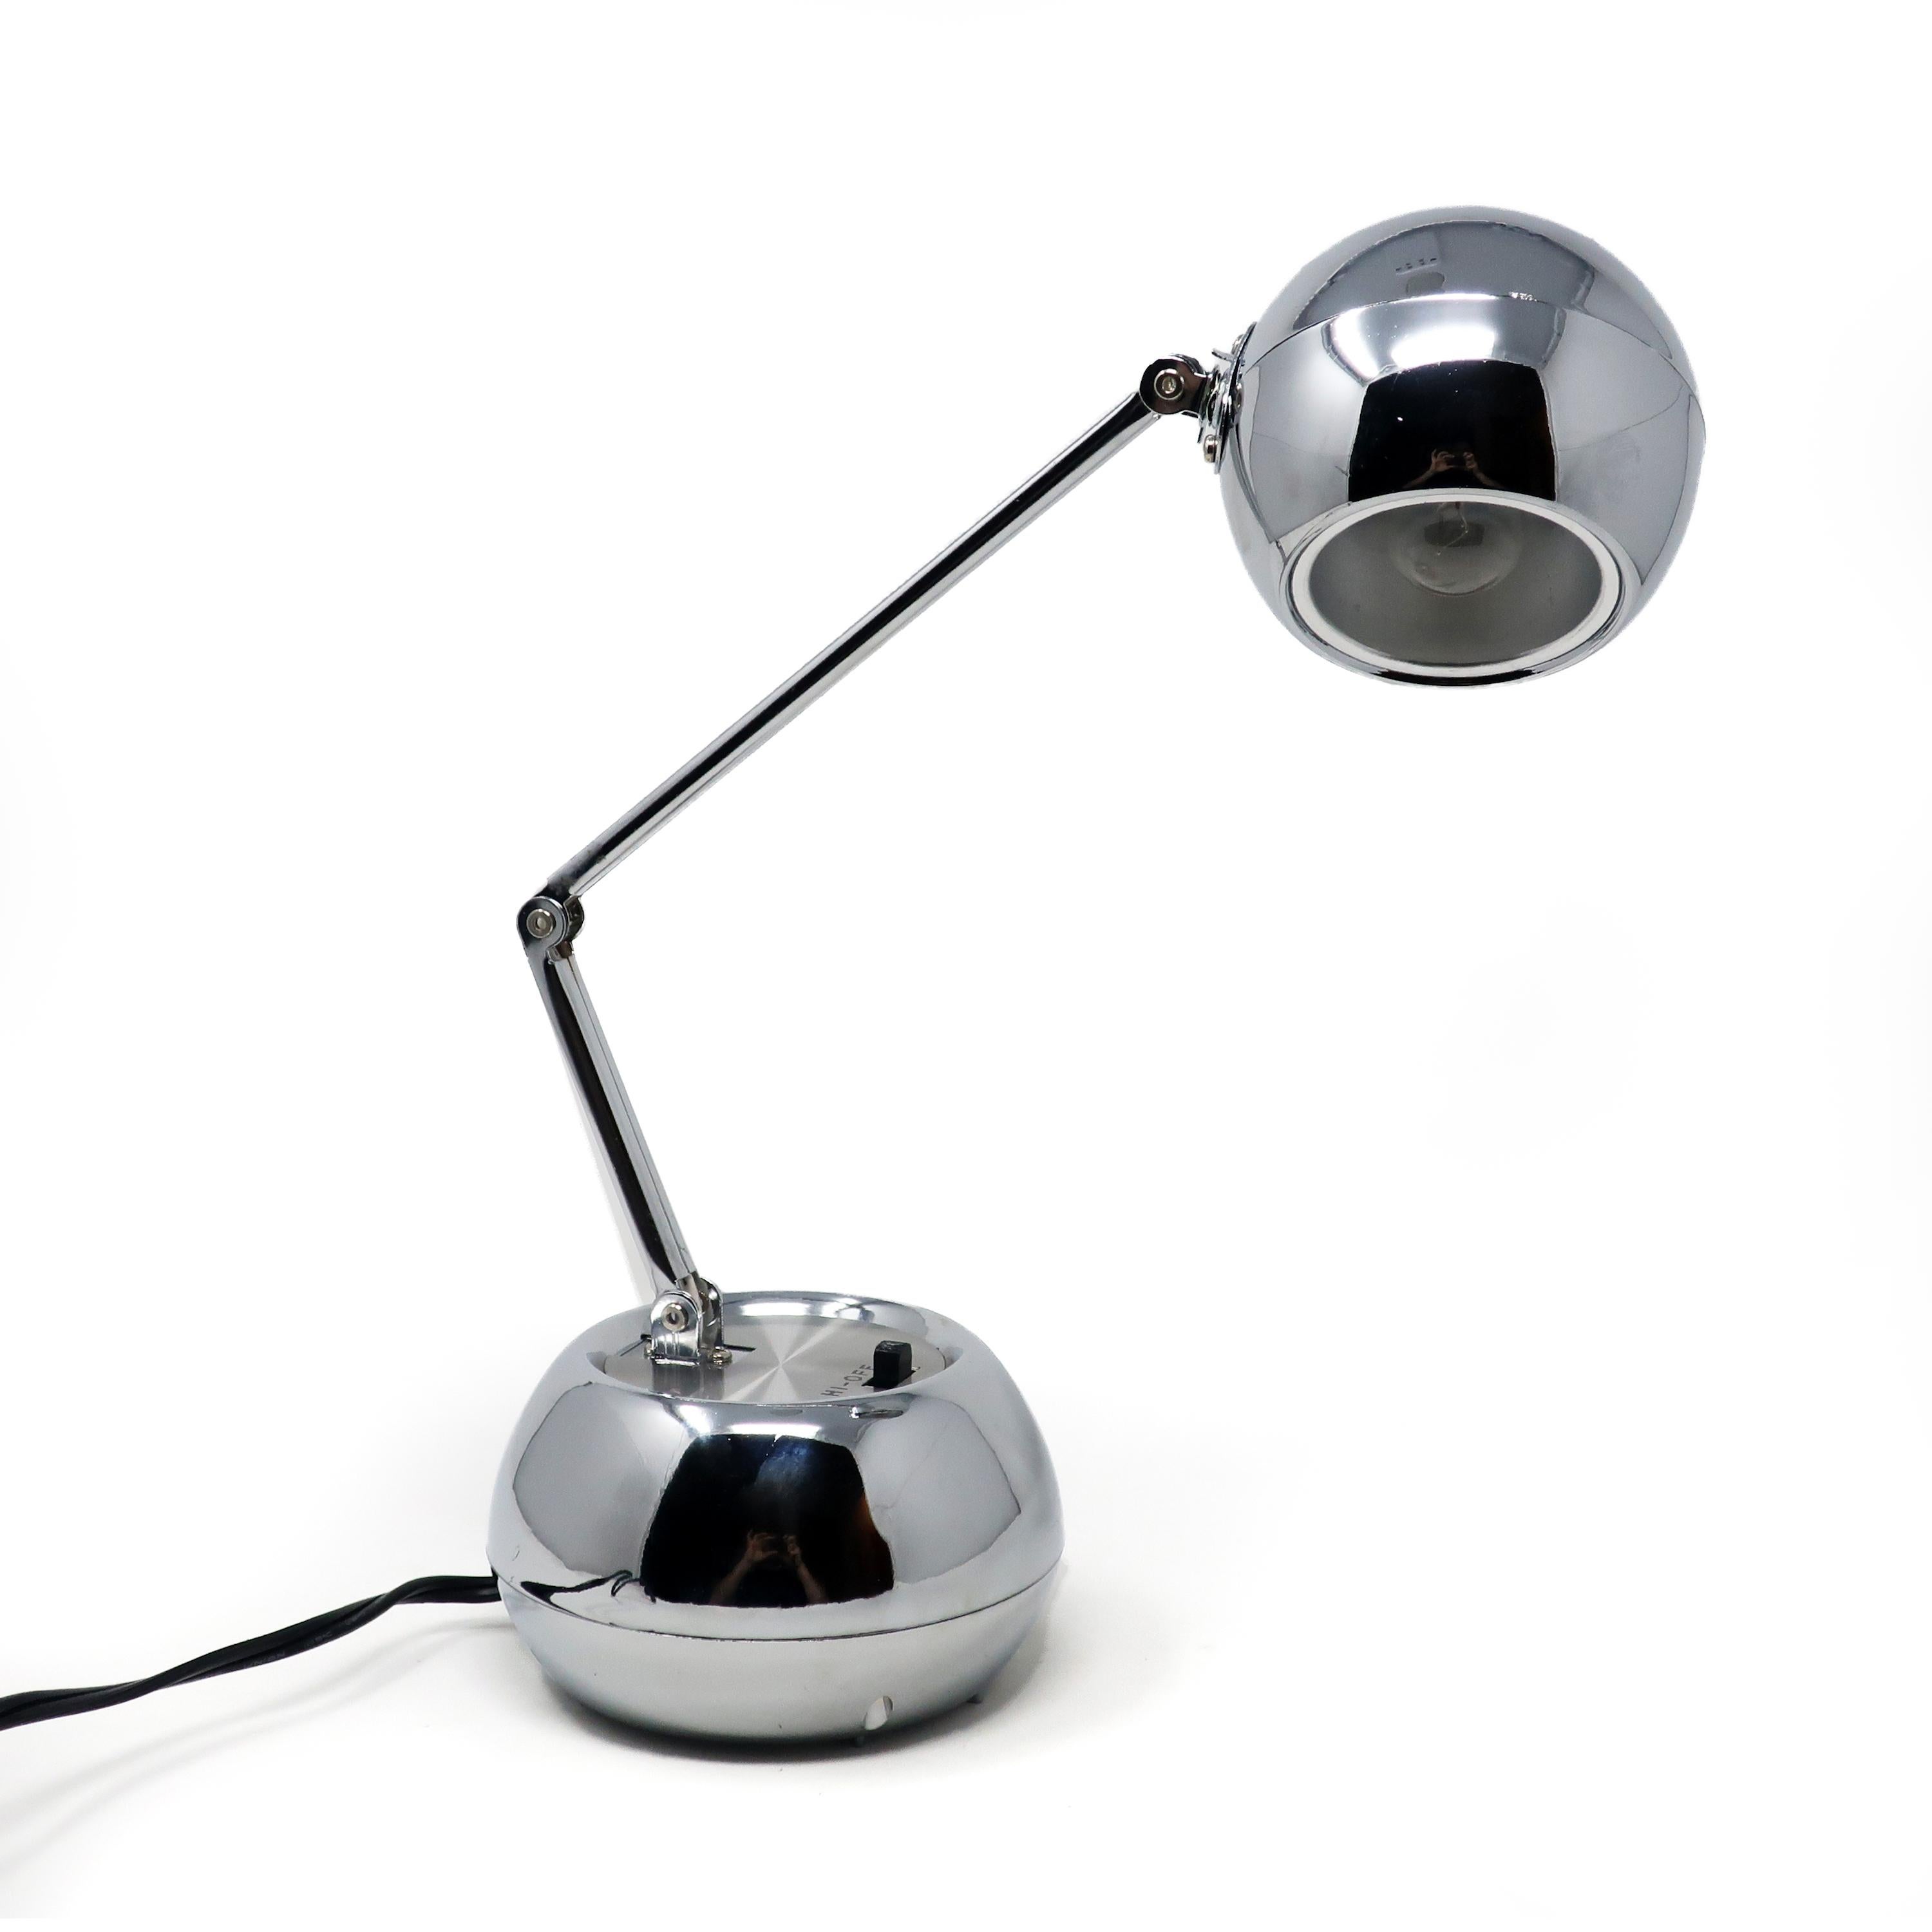 A stunning vintage Tensor Model HIL-69 eyeball desk lamp. Silver plastic base, silver plastic shade, and a chrome arm with a two intensity switch on the base. In very good vintage condition.

Measures: 8.5